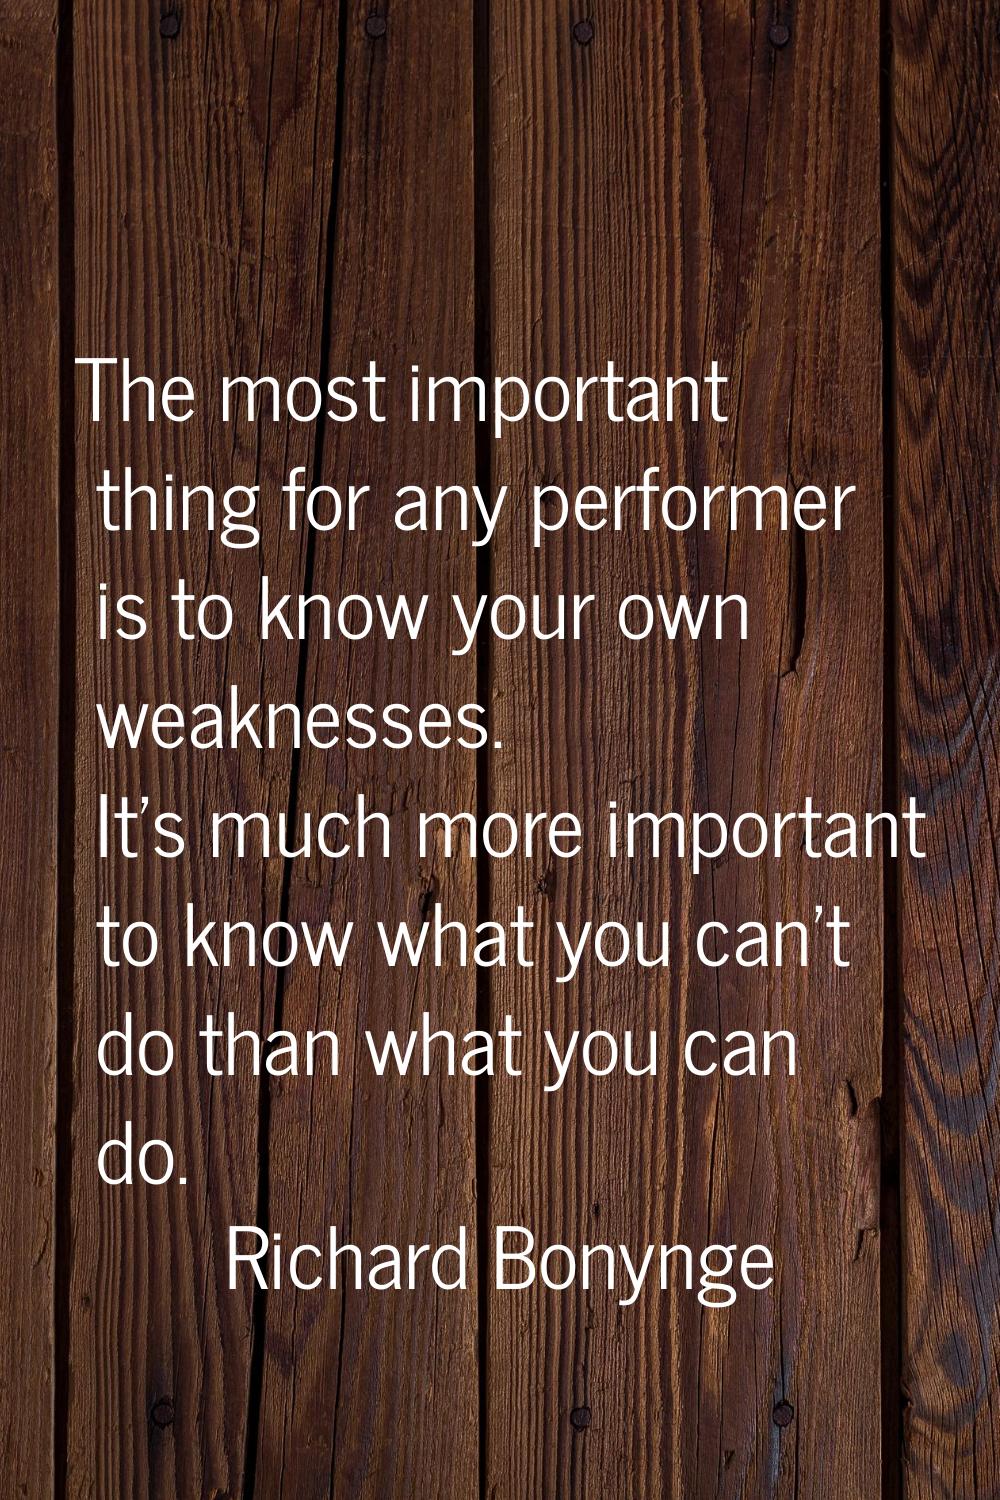 The most important thing for any performer is to know your own weaknesses. It's much more important